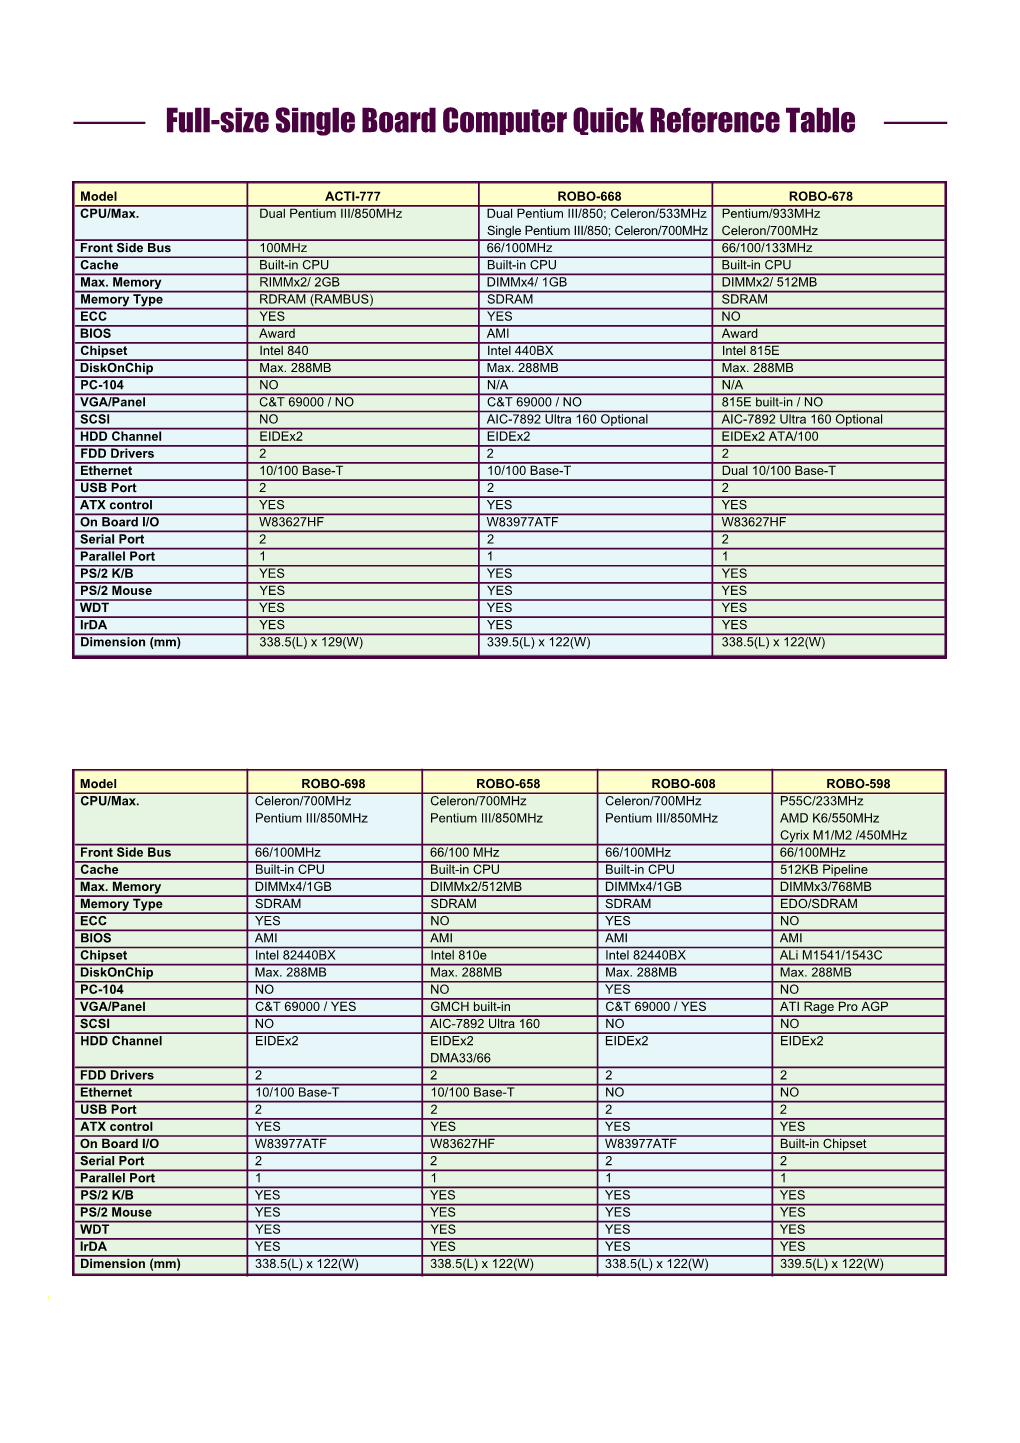 Full-Size Single Board Computer Quick Reference Table